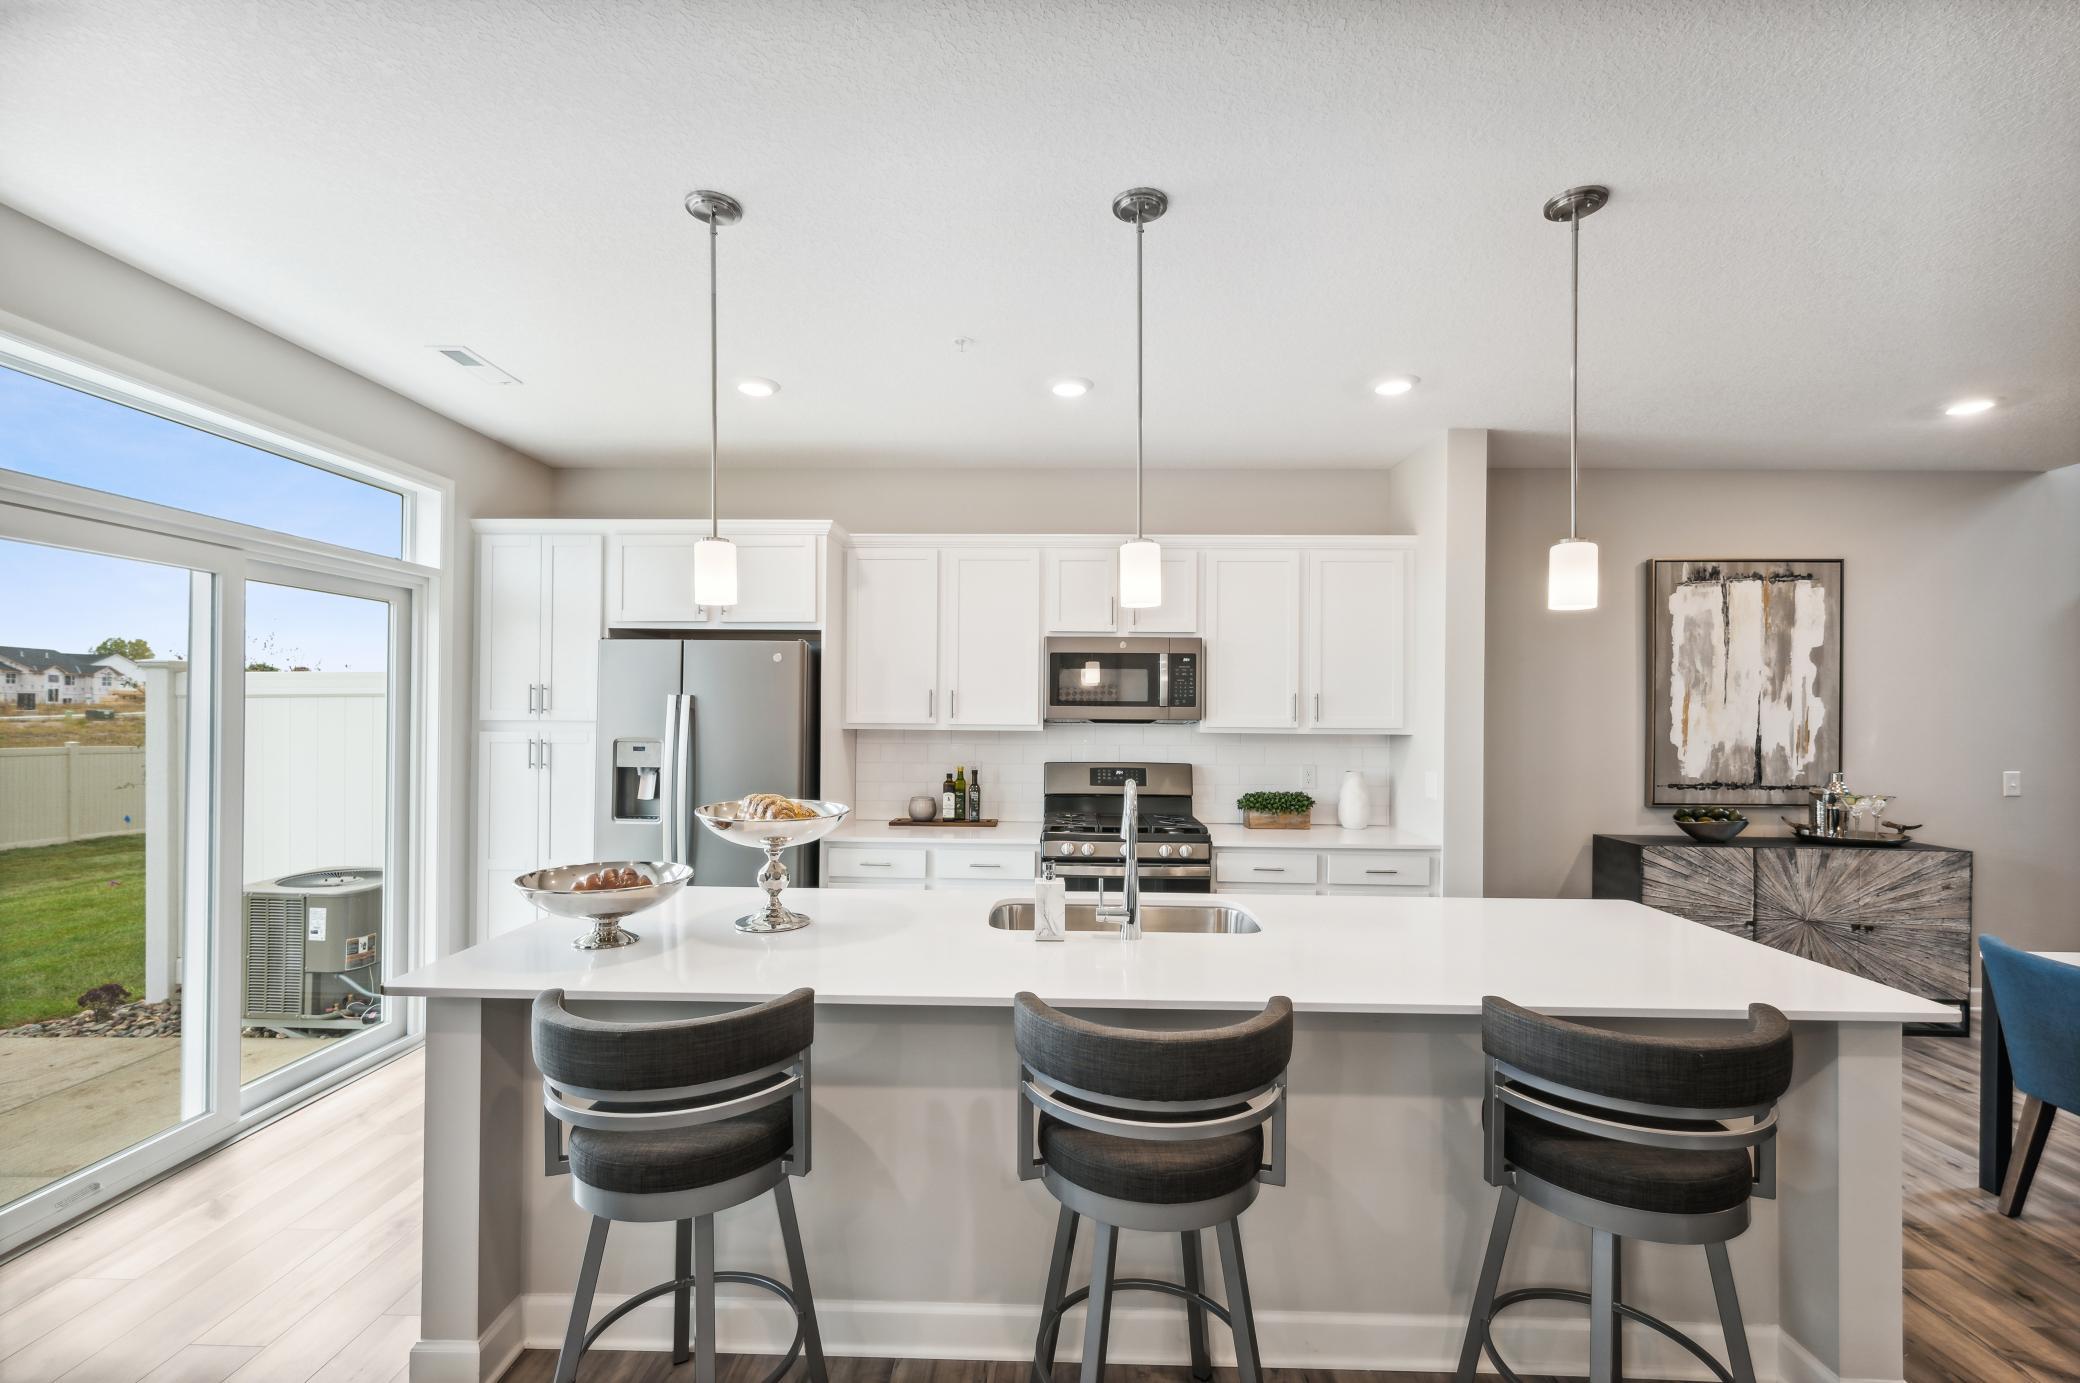 Welcome to the St. Clair! Offering a spacious kitchen with large island, quartz countertops, tile backsplash, white cabinets, pull out trash/recycling cabinet and popular slate finish appliances! *Photos of model home; colors and finishes will vary.